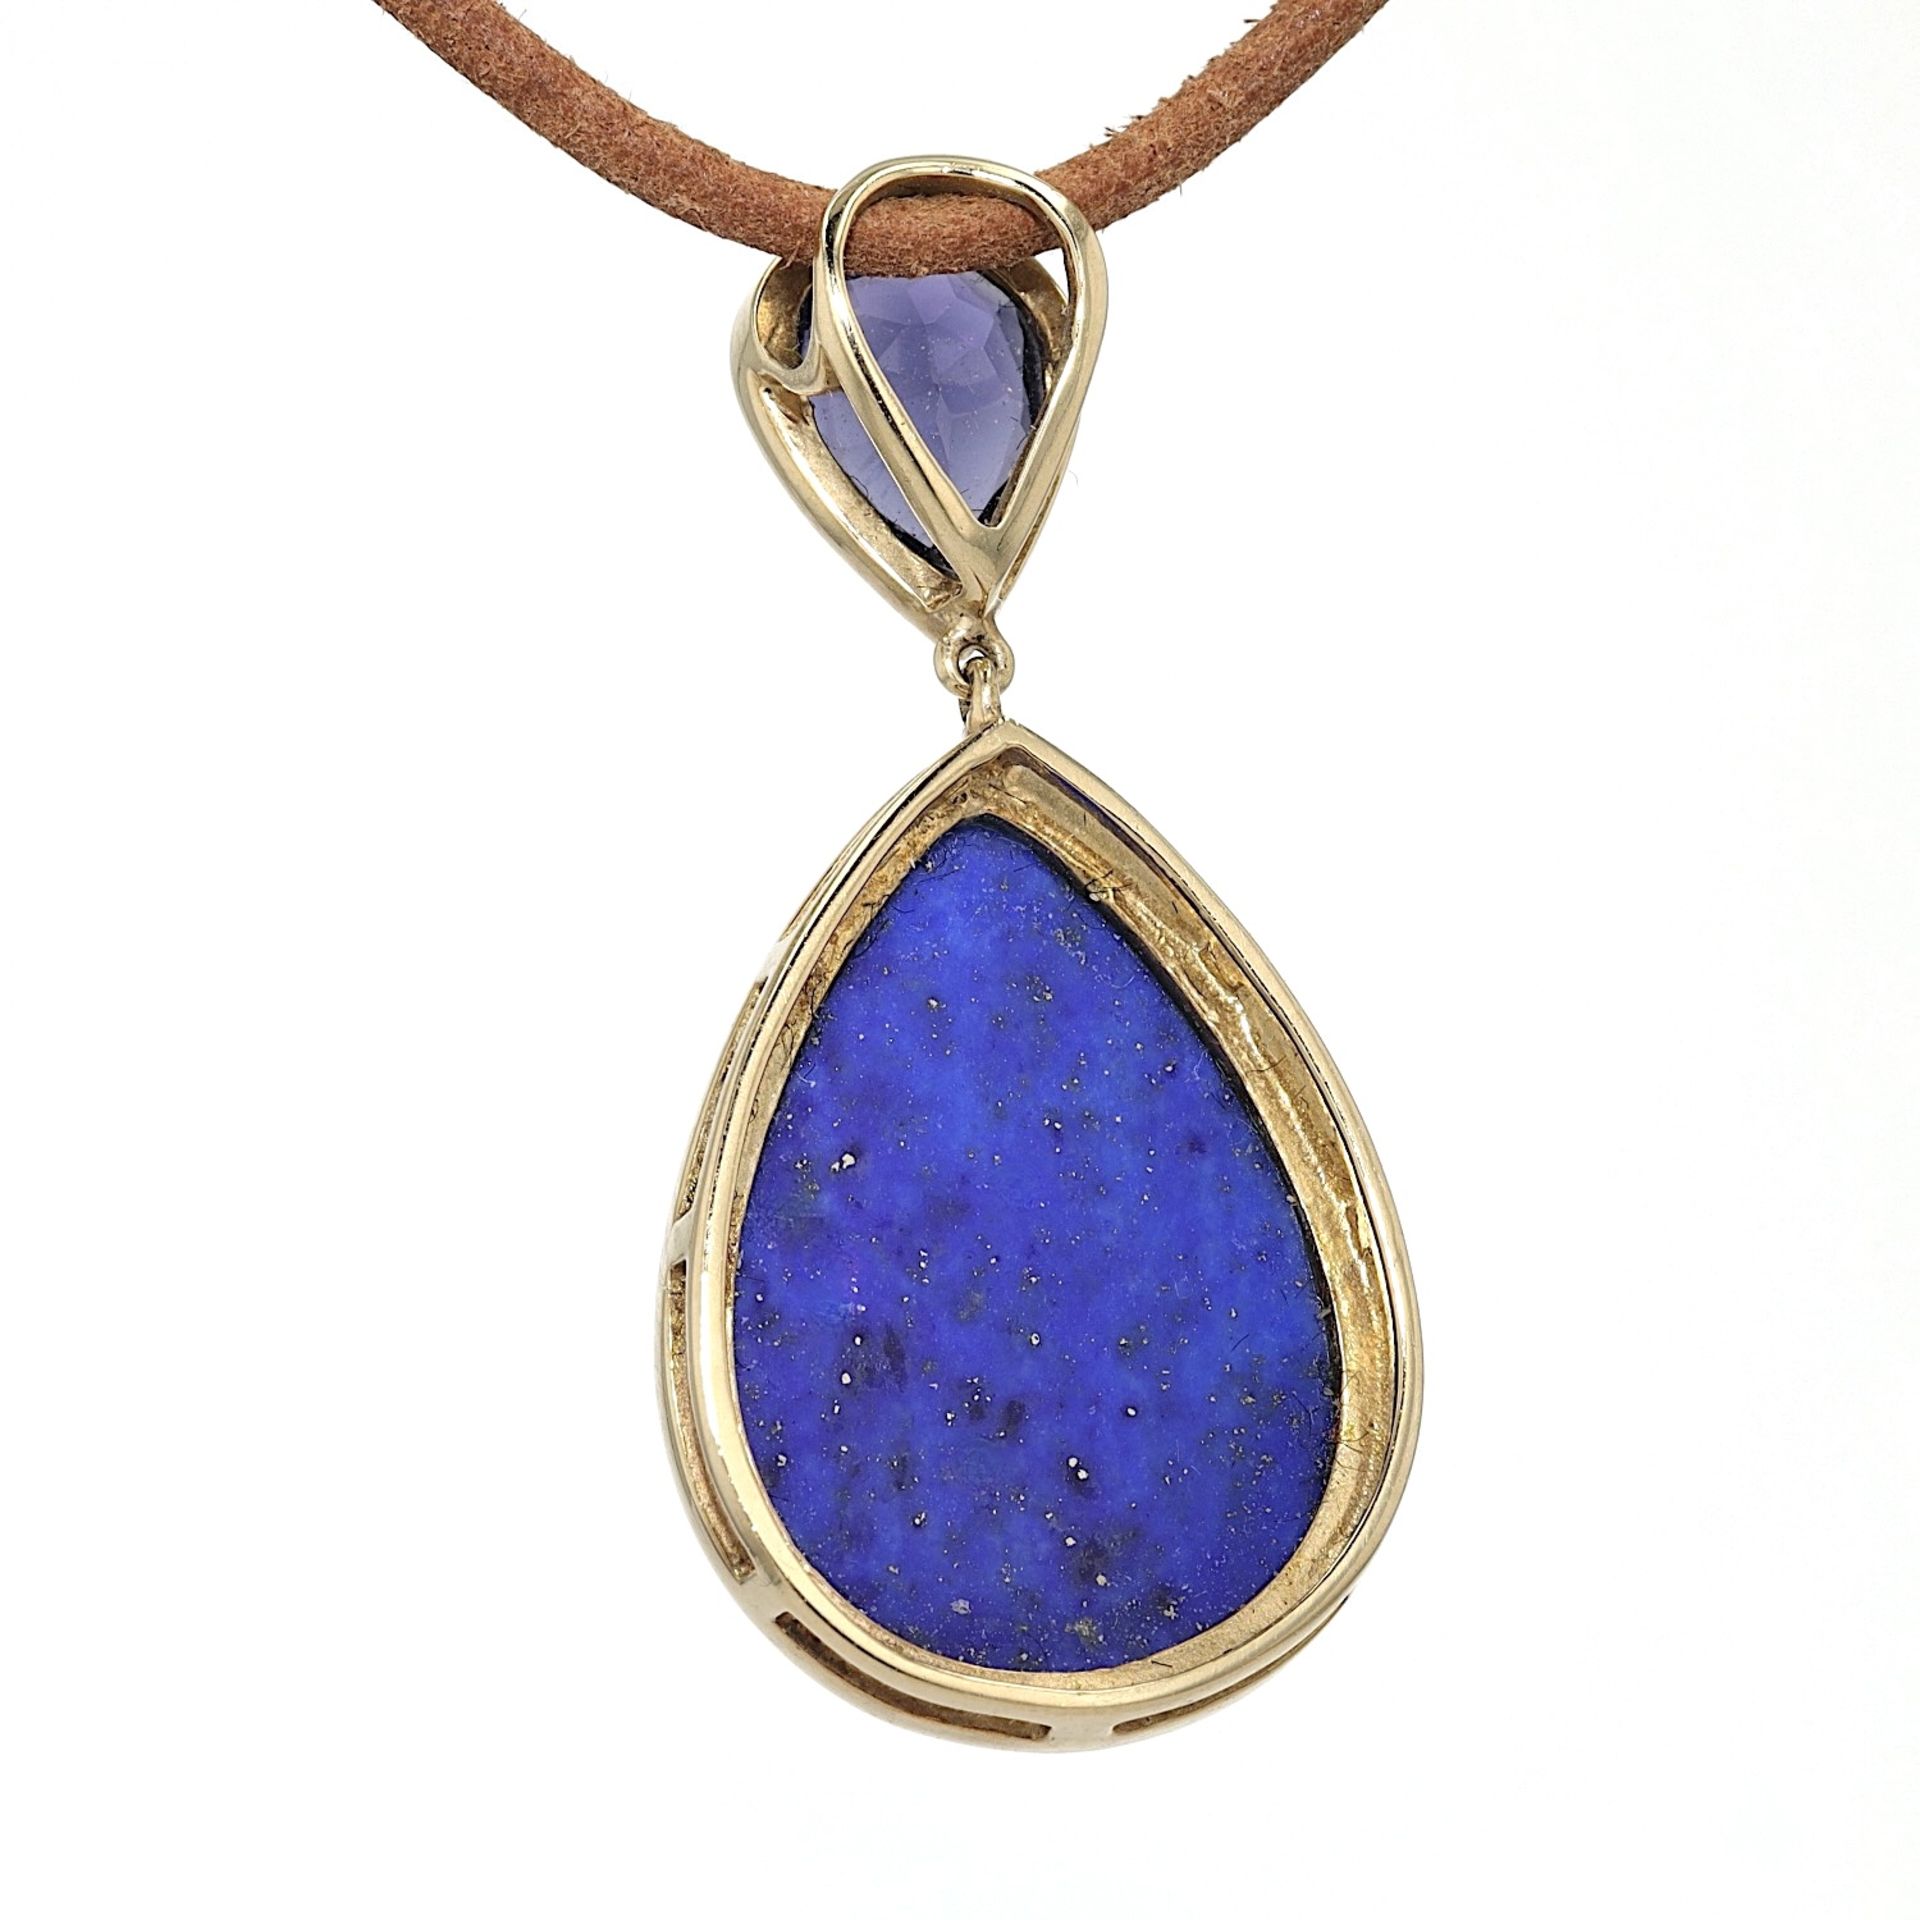 Pendant with a lapis lazuli - Image 4 of 4